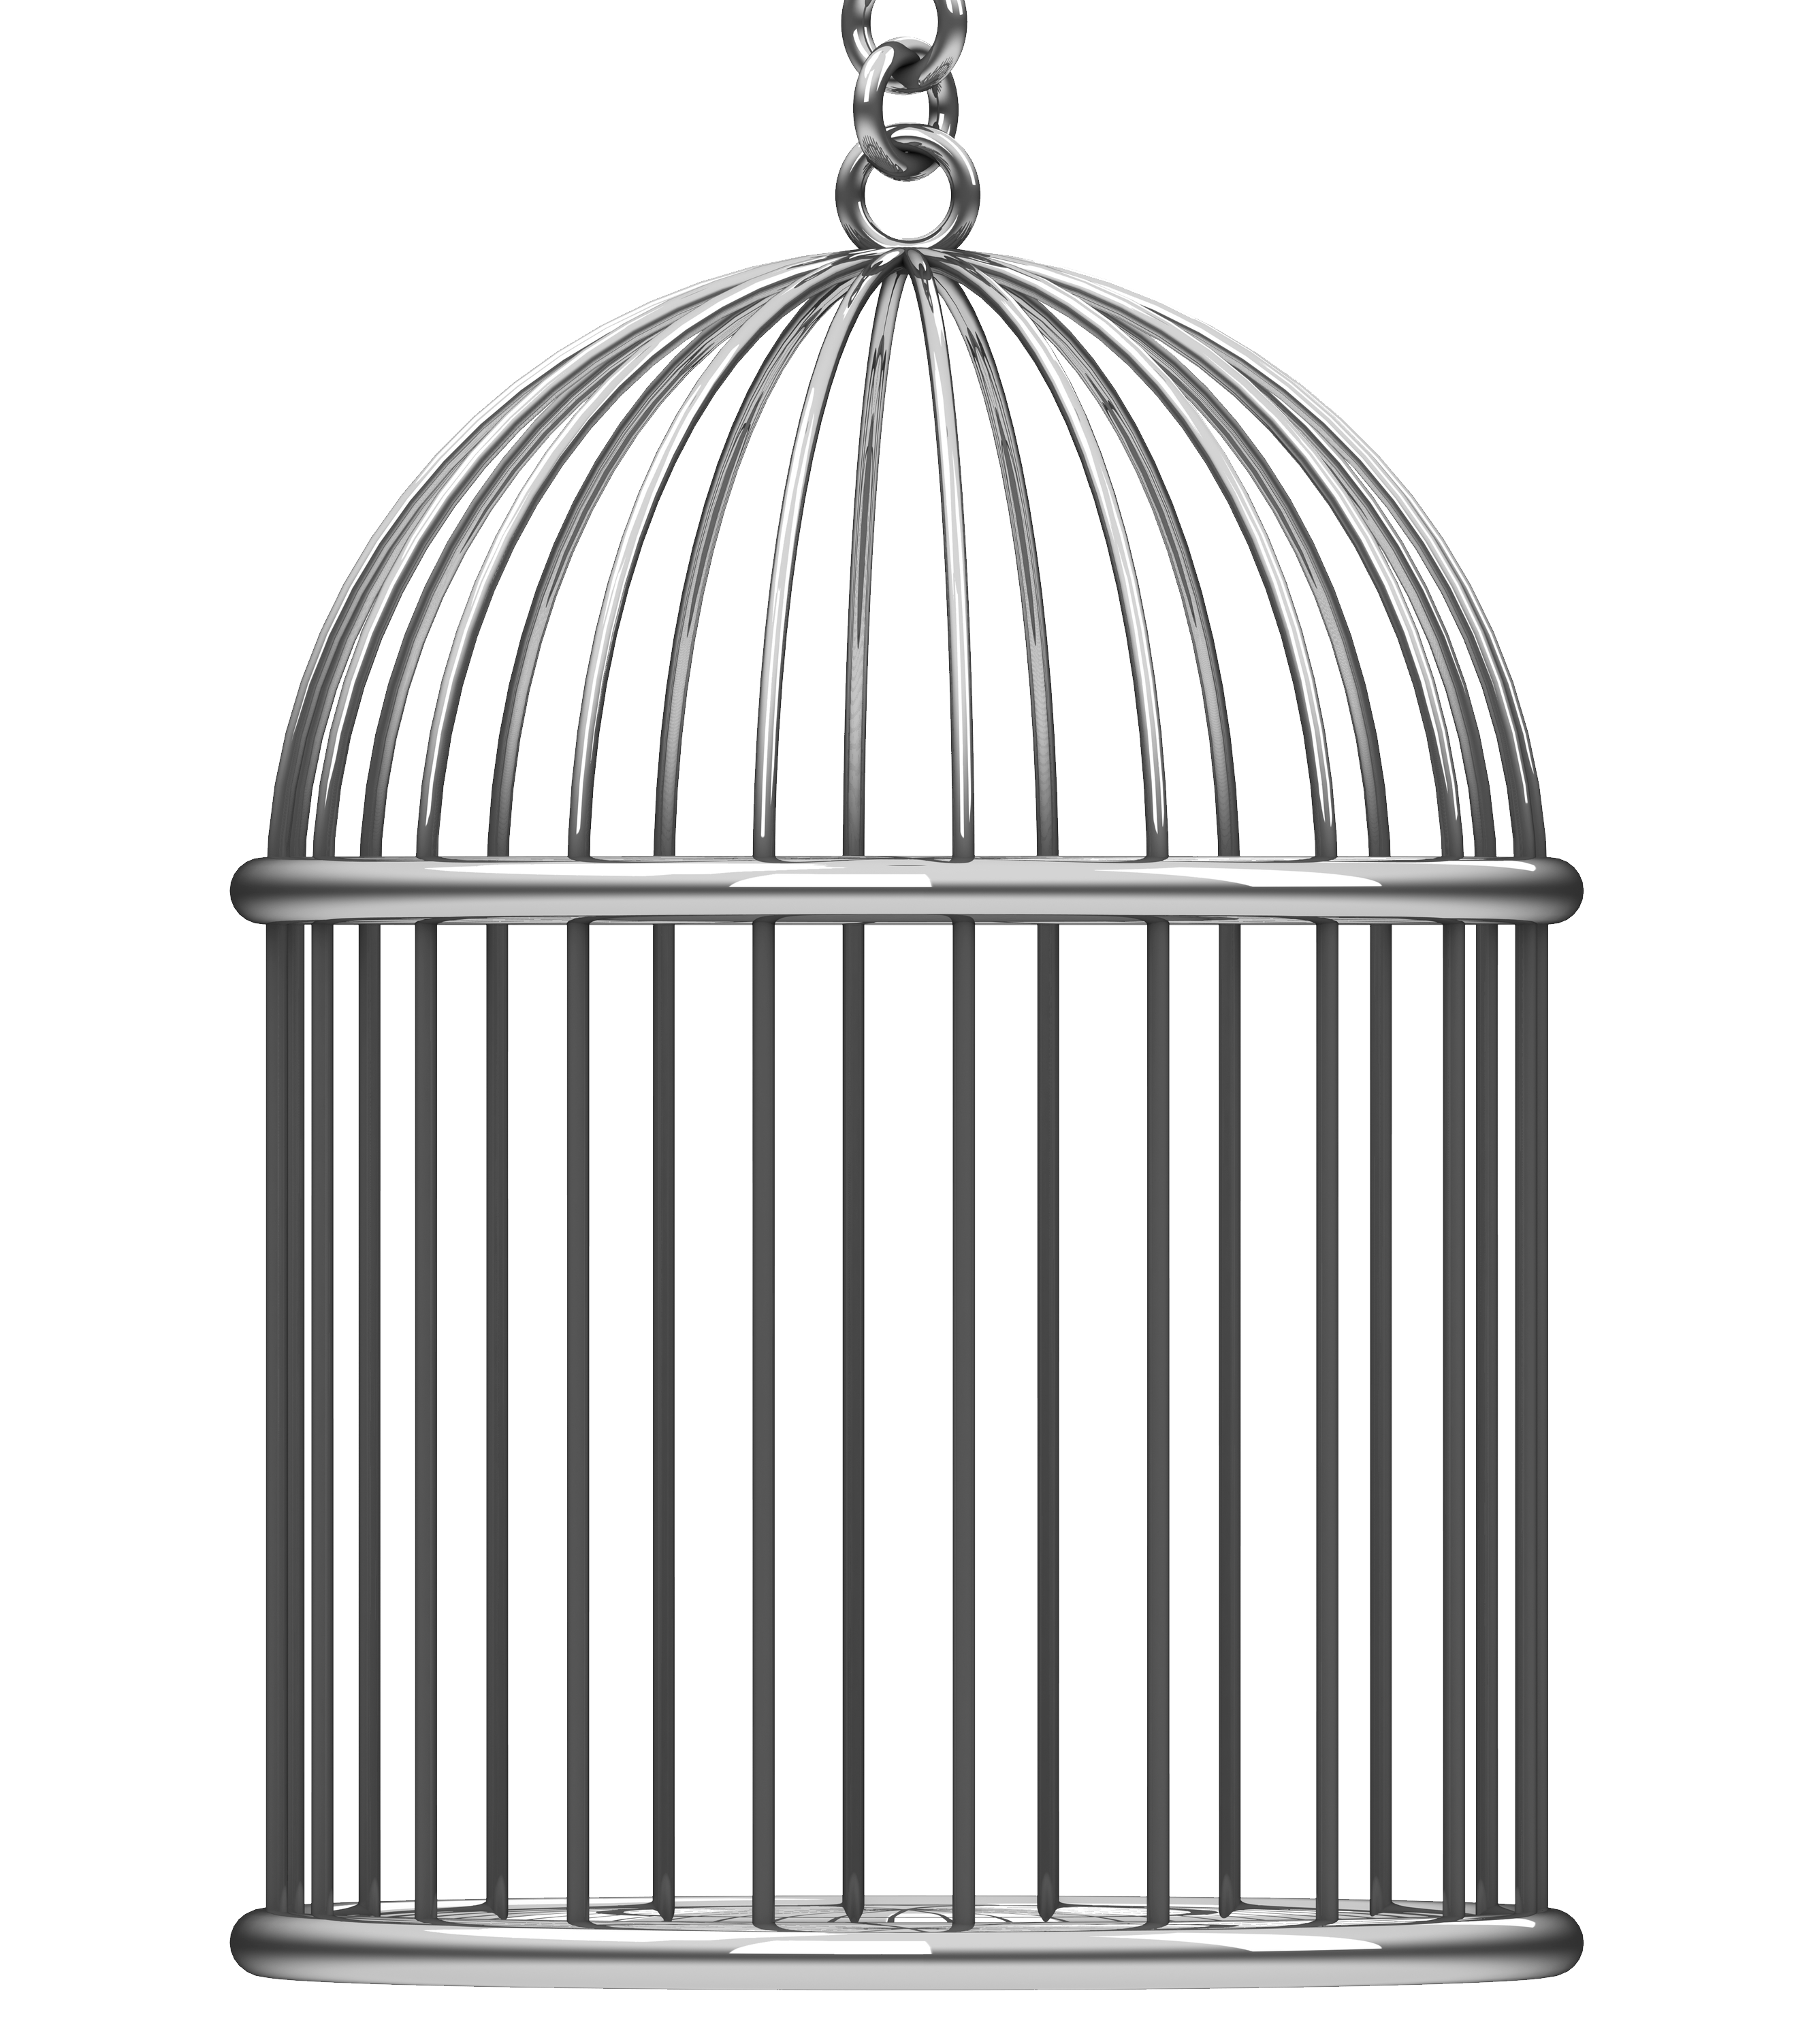 Cage clipart empty object, Cage empty object Transparent FREE for